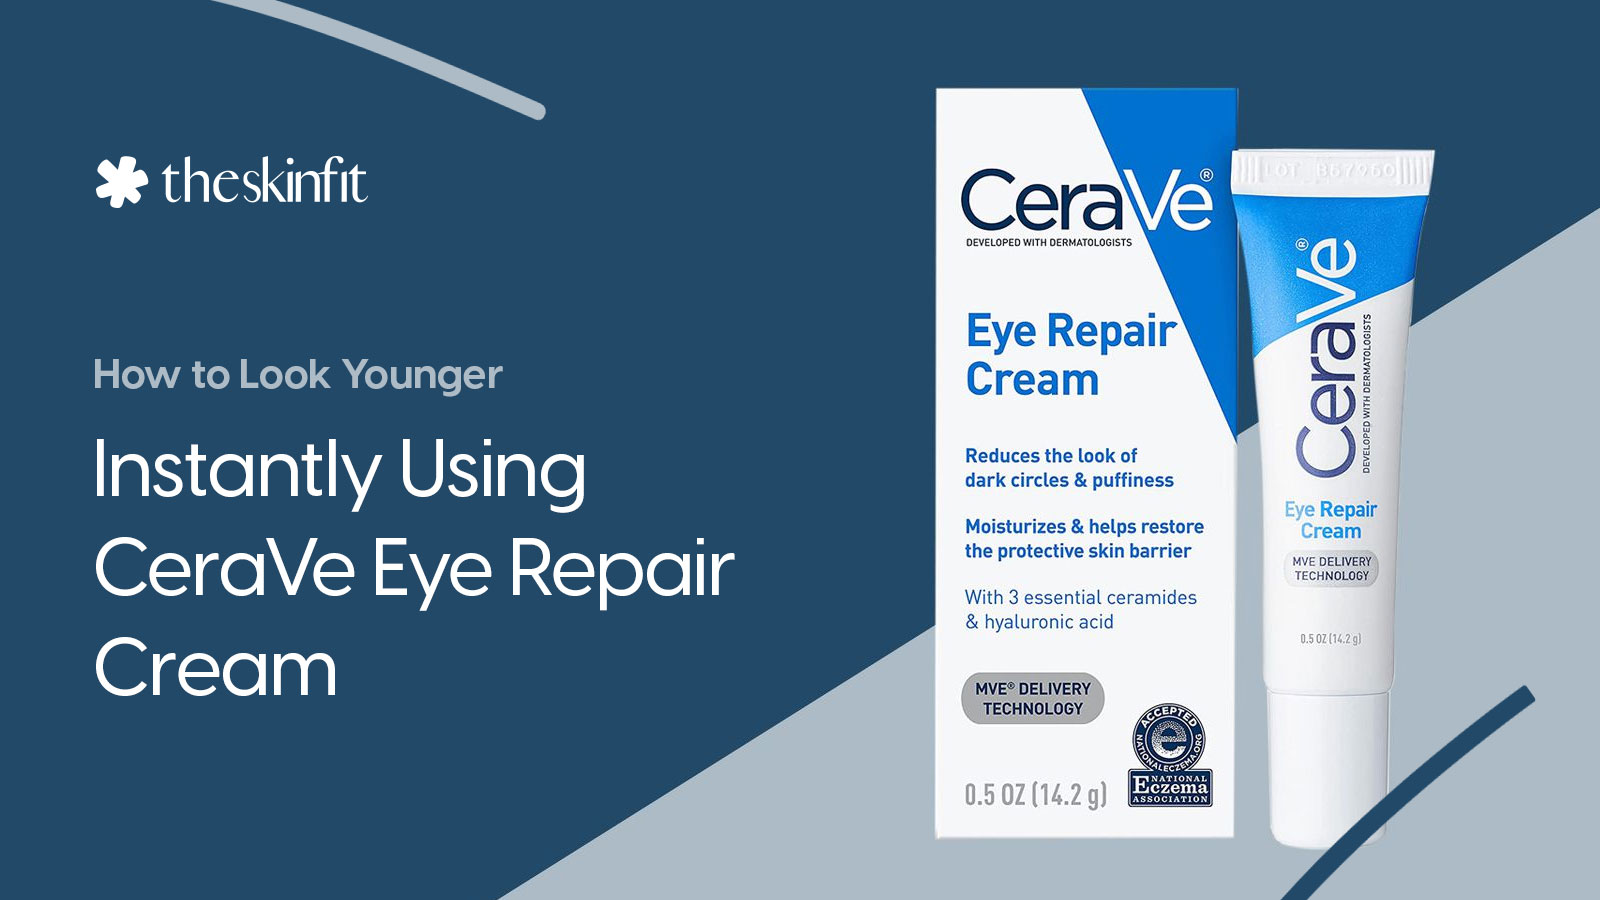 How to Look Younger Instantly Using CeraVe Eye Repair Cream